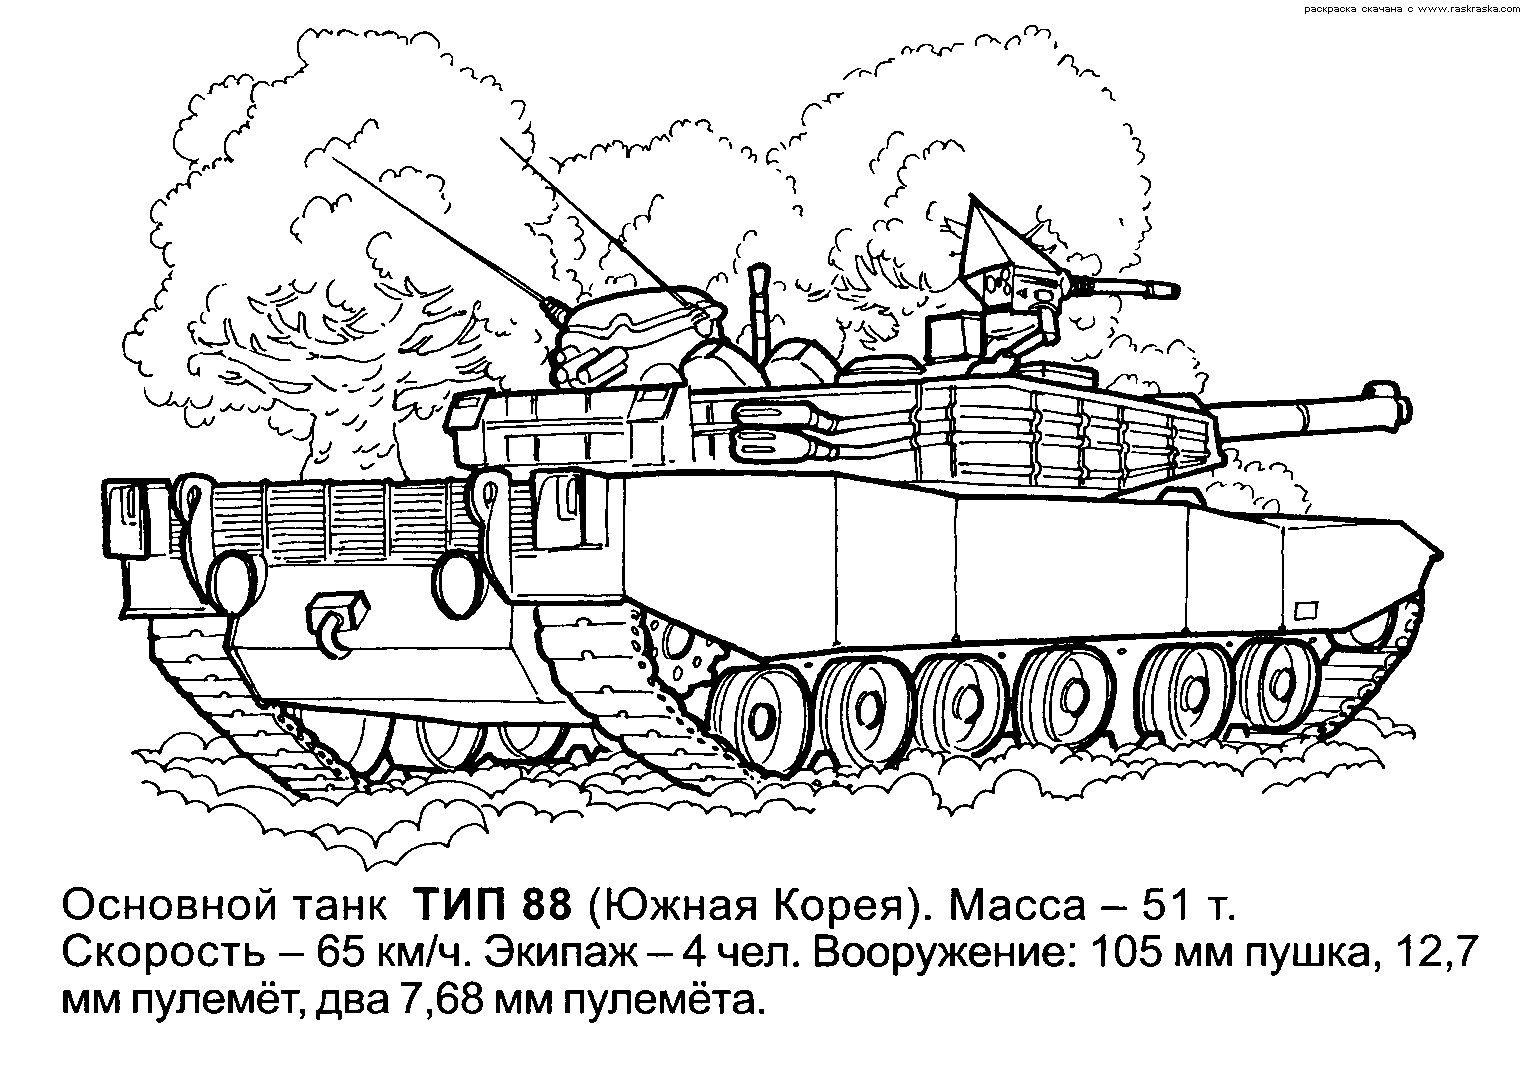 Tank Coloring Pages Free War Military 15 Army Tanks